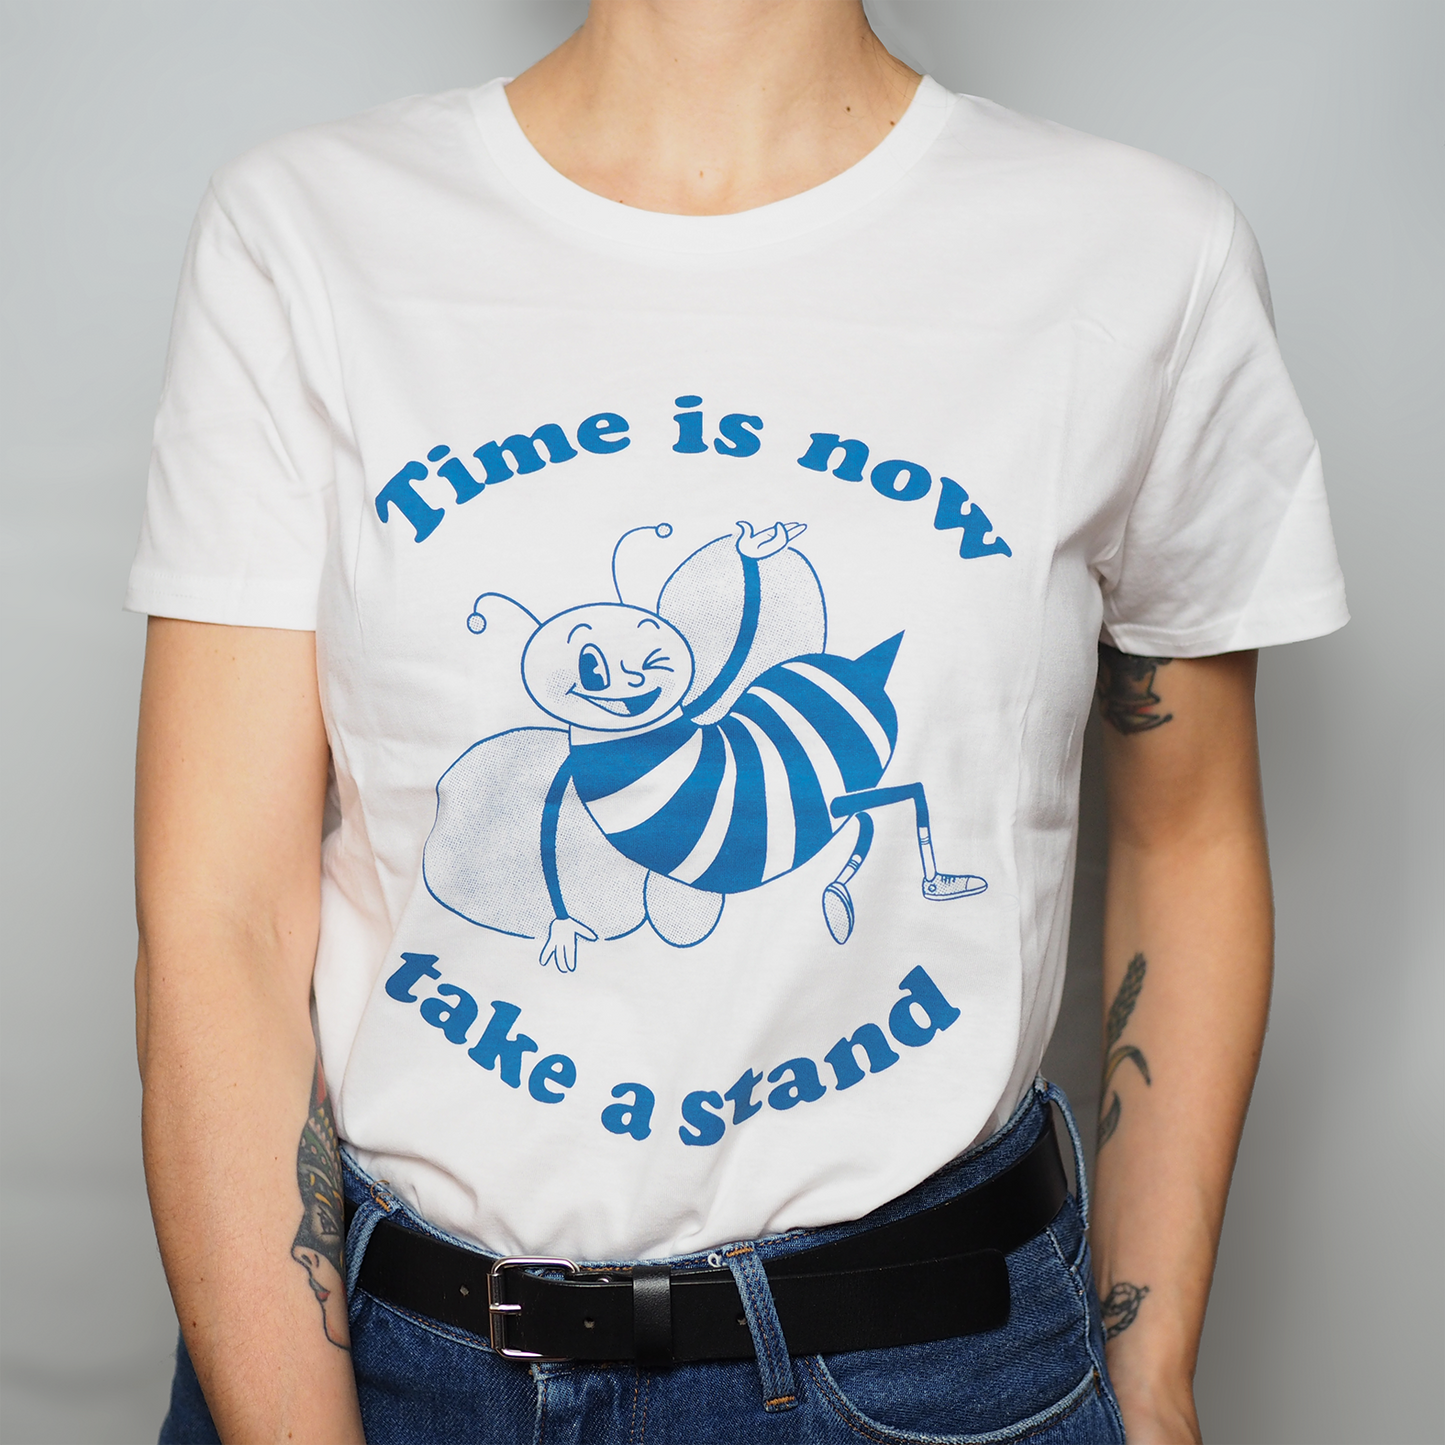 Time is Now, Take a Stand- Fitted Organic Cotton T-shirt